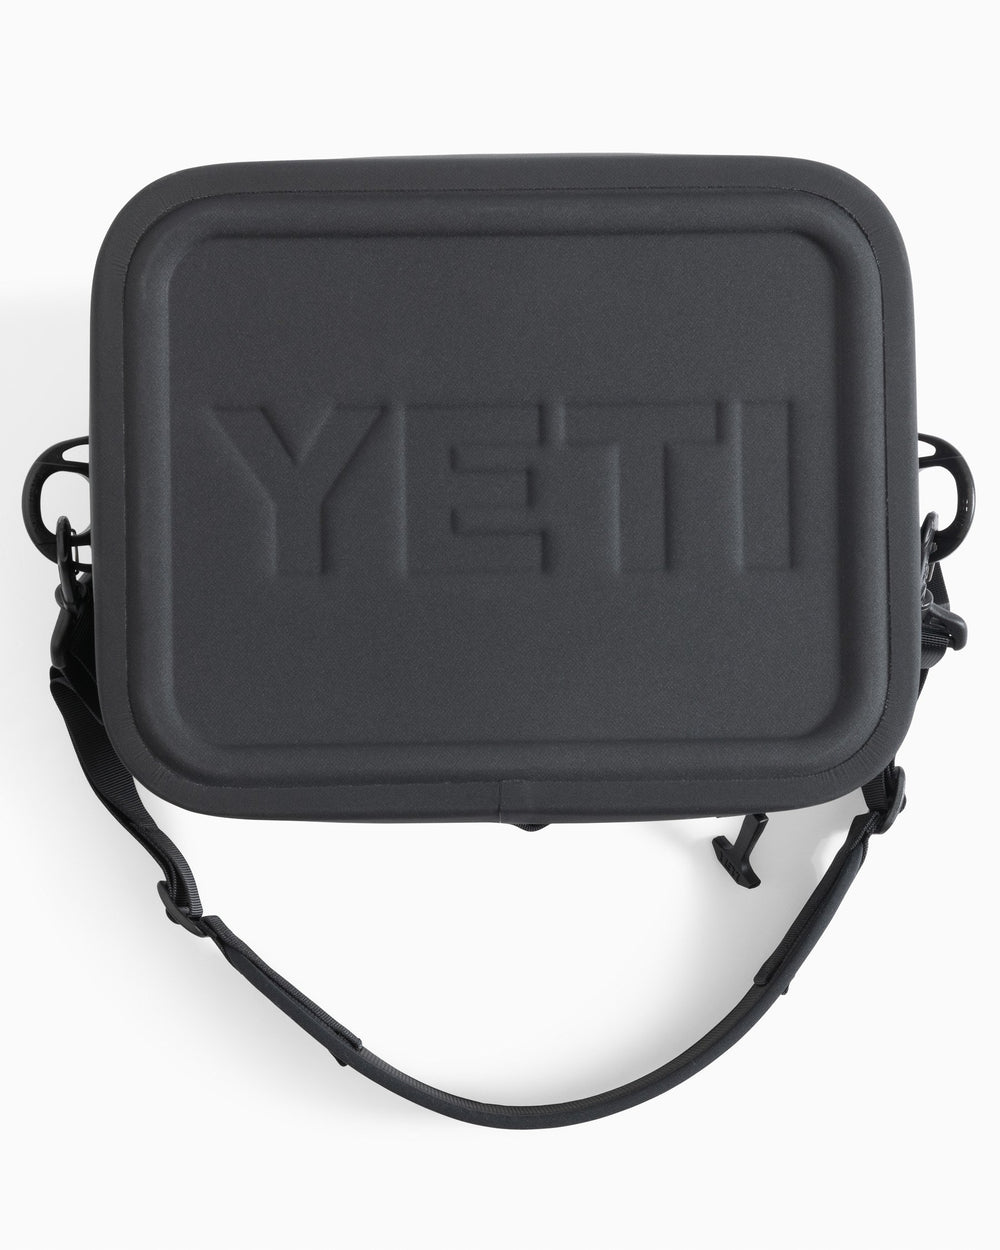 The top view of the Yeti Hopper Flip 12 by Southern Tide - Charcoal